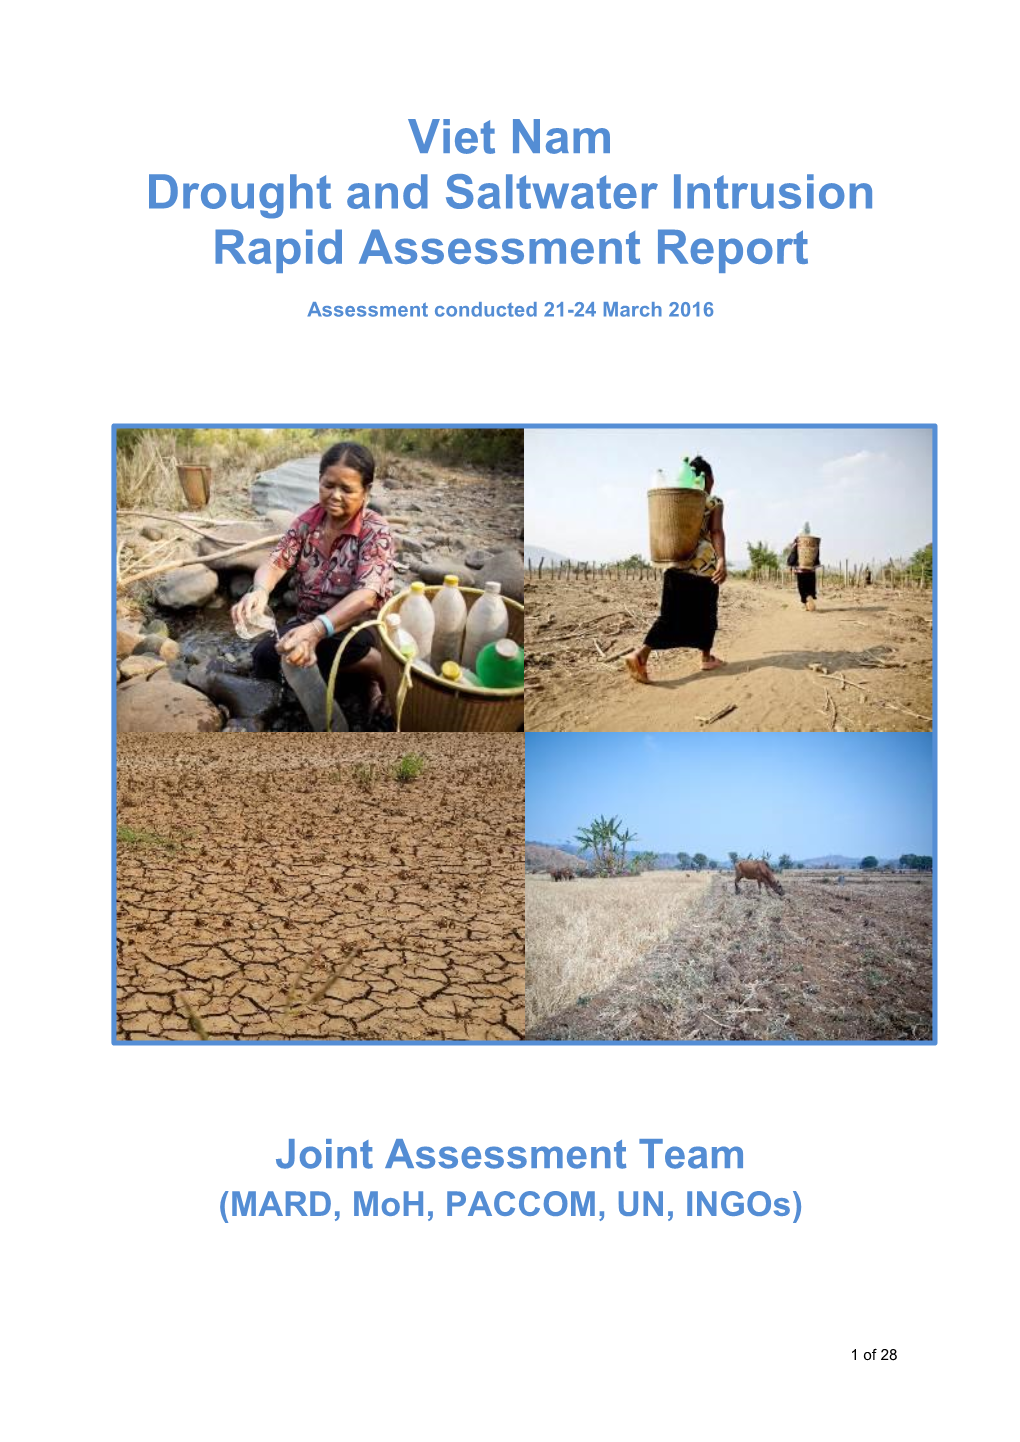 Viet Nam Drought and Saltwater Intrusion Rapid Assessment Report